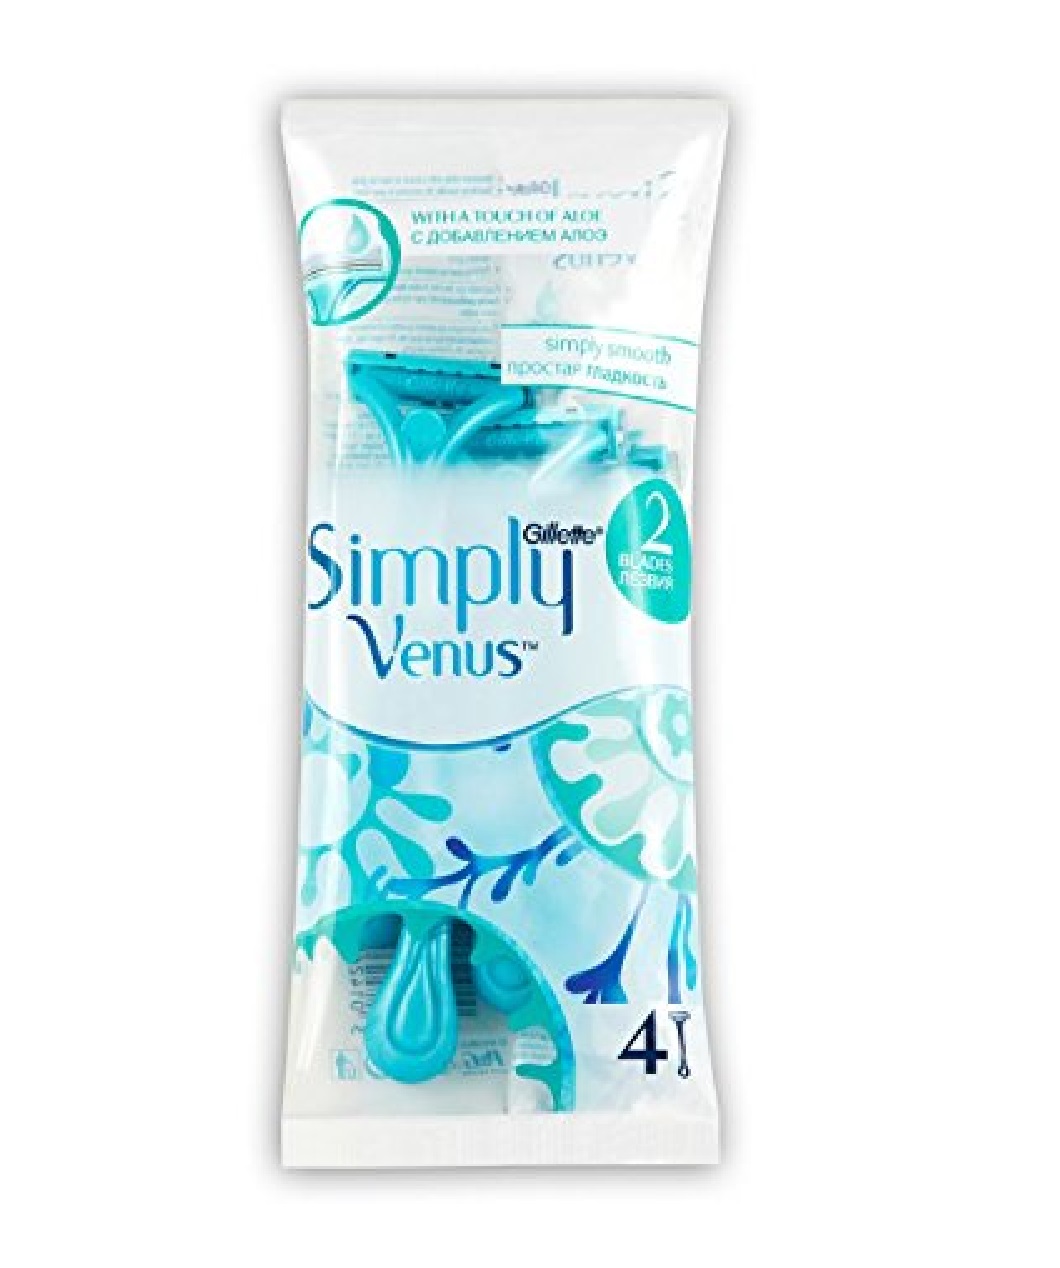 Gillette Simply Venus 2 Blade Disposable Razors With A Touch of Aloe, 4 Count - image 1 of 7